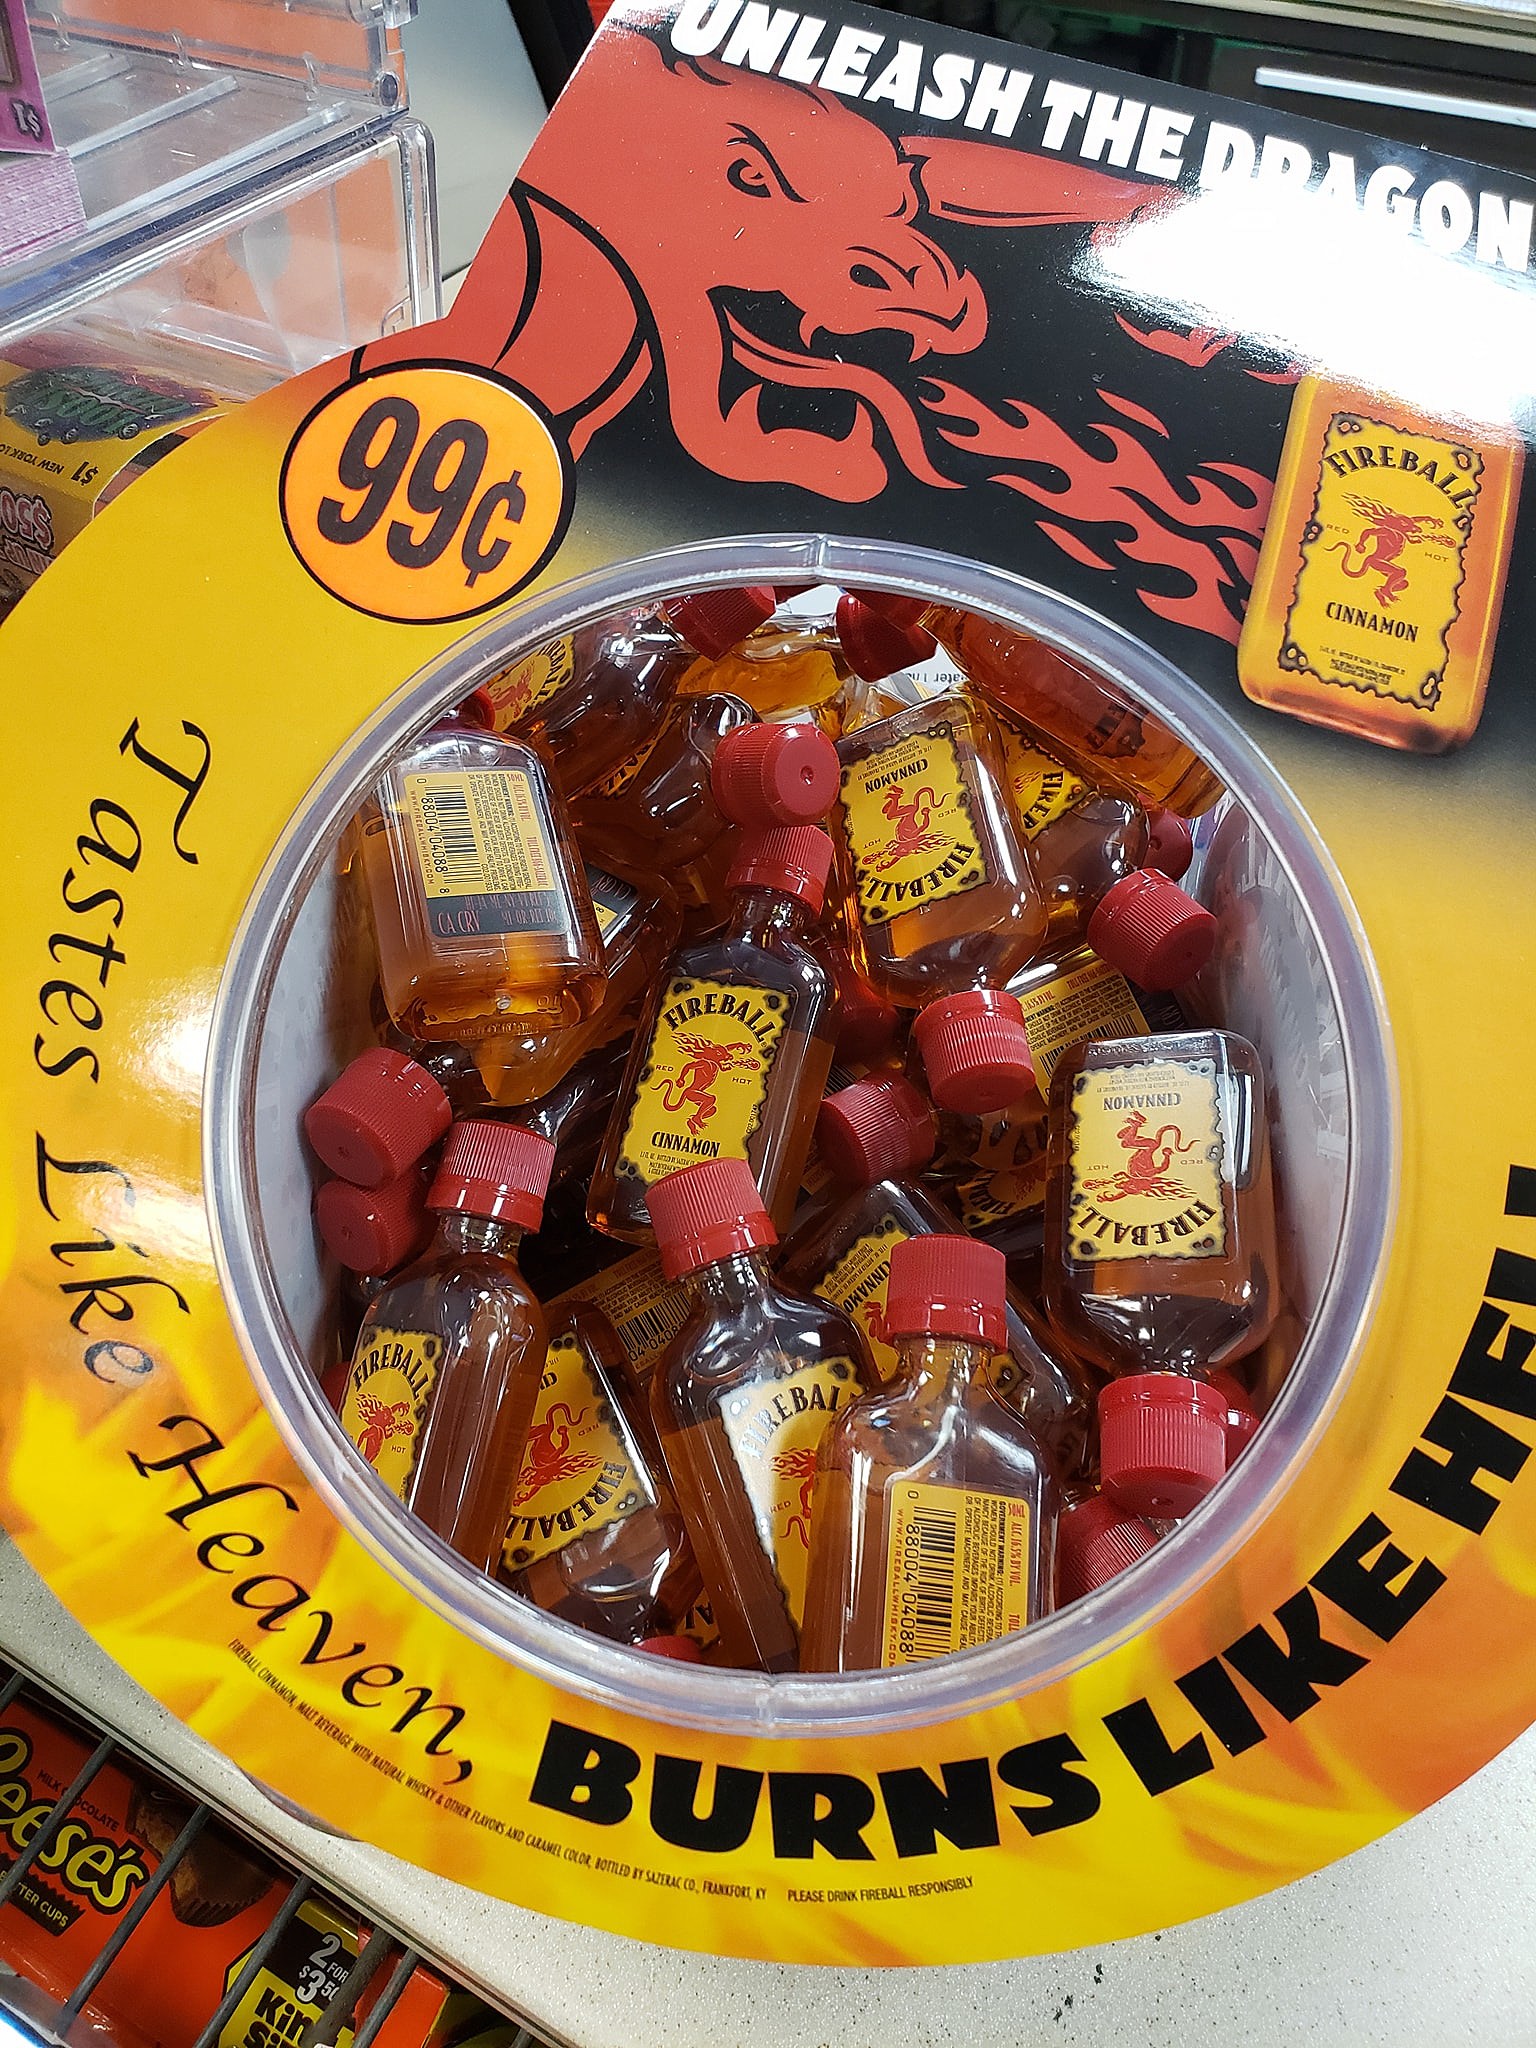 Maker of Fireball whiskey sues distributor over shortages, millions in  unpaid bills